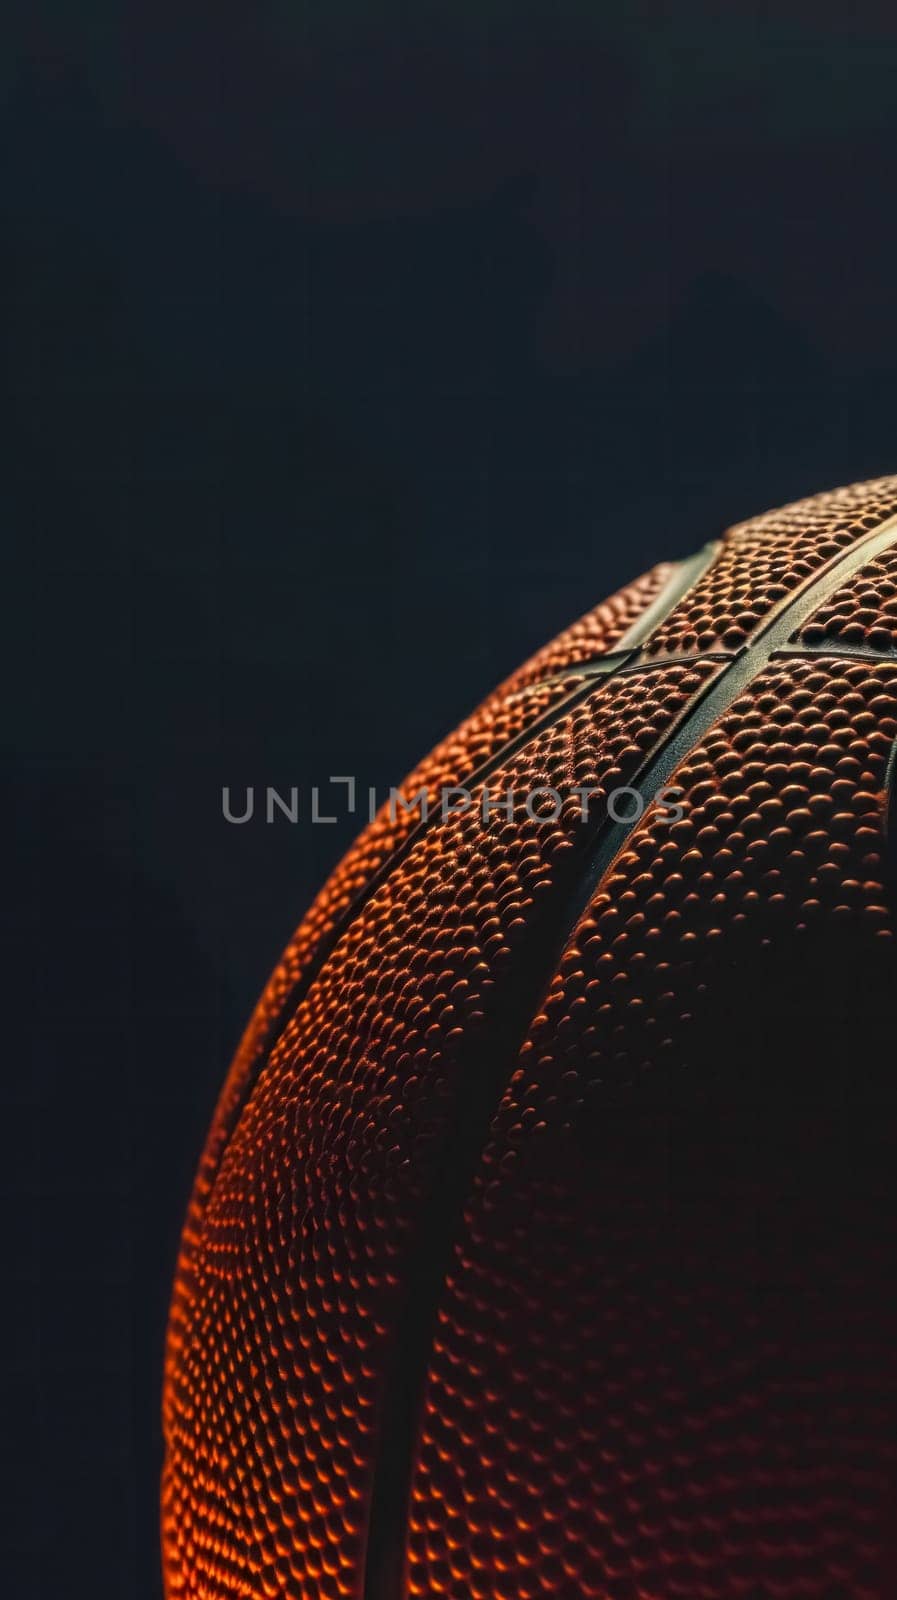 basketball with a warm, glowing light accentuating its textured surface. The black backdrop provides a stark contrast, highlighting the intricate details, distinctive pattern of the ball's exterior